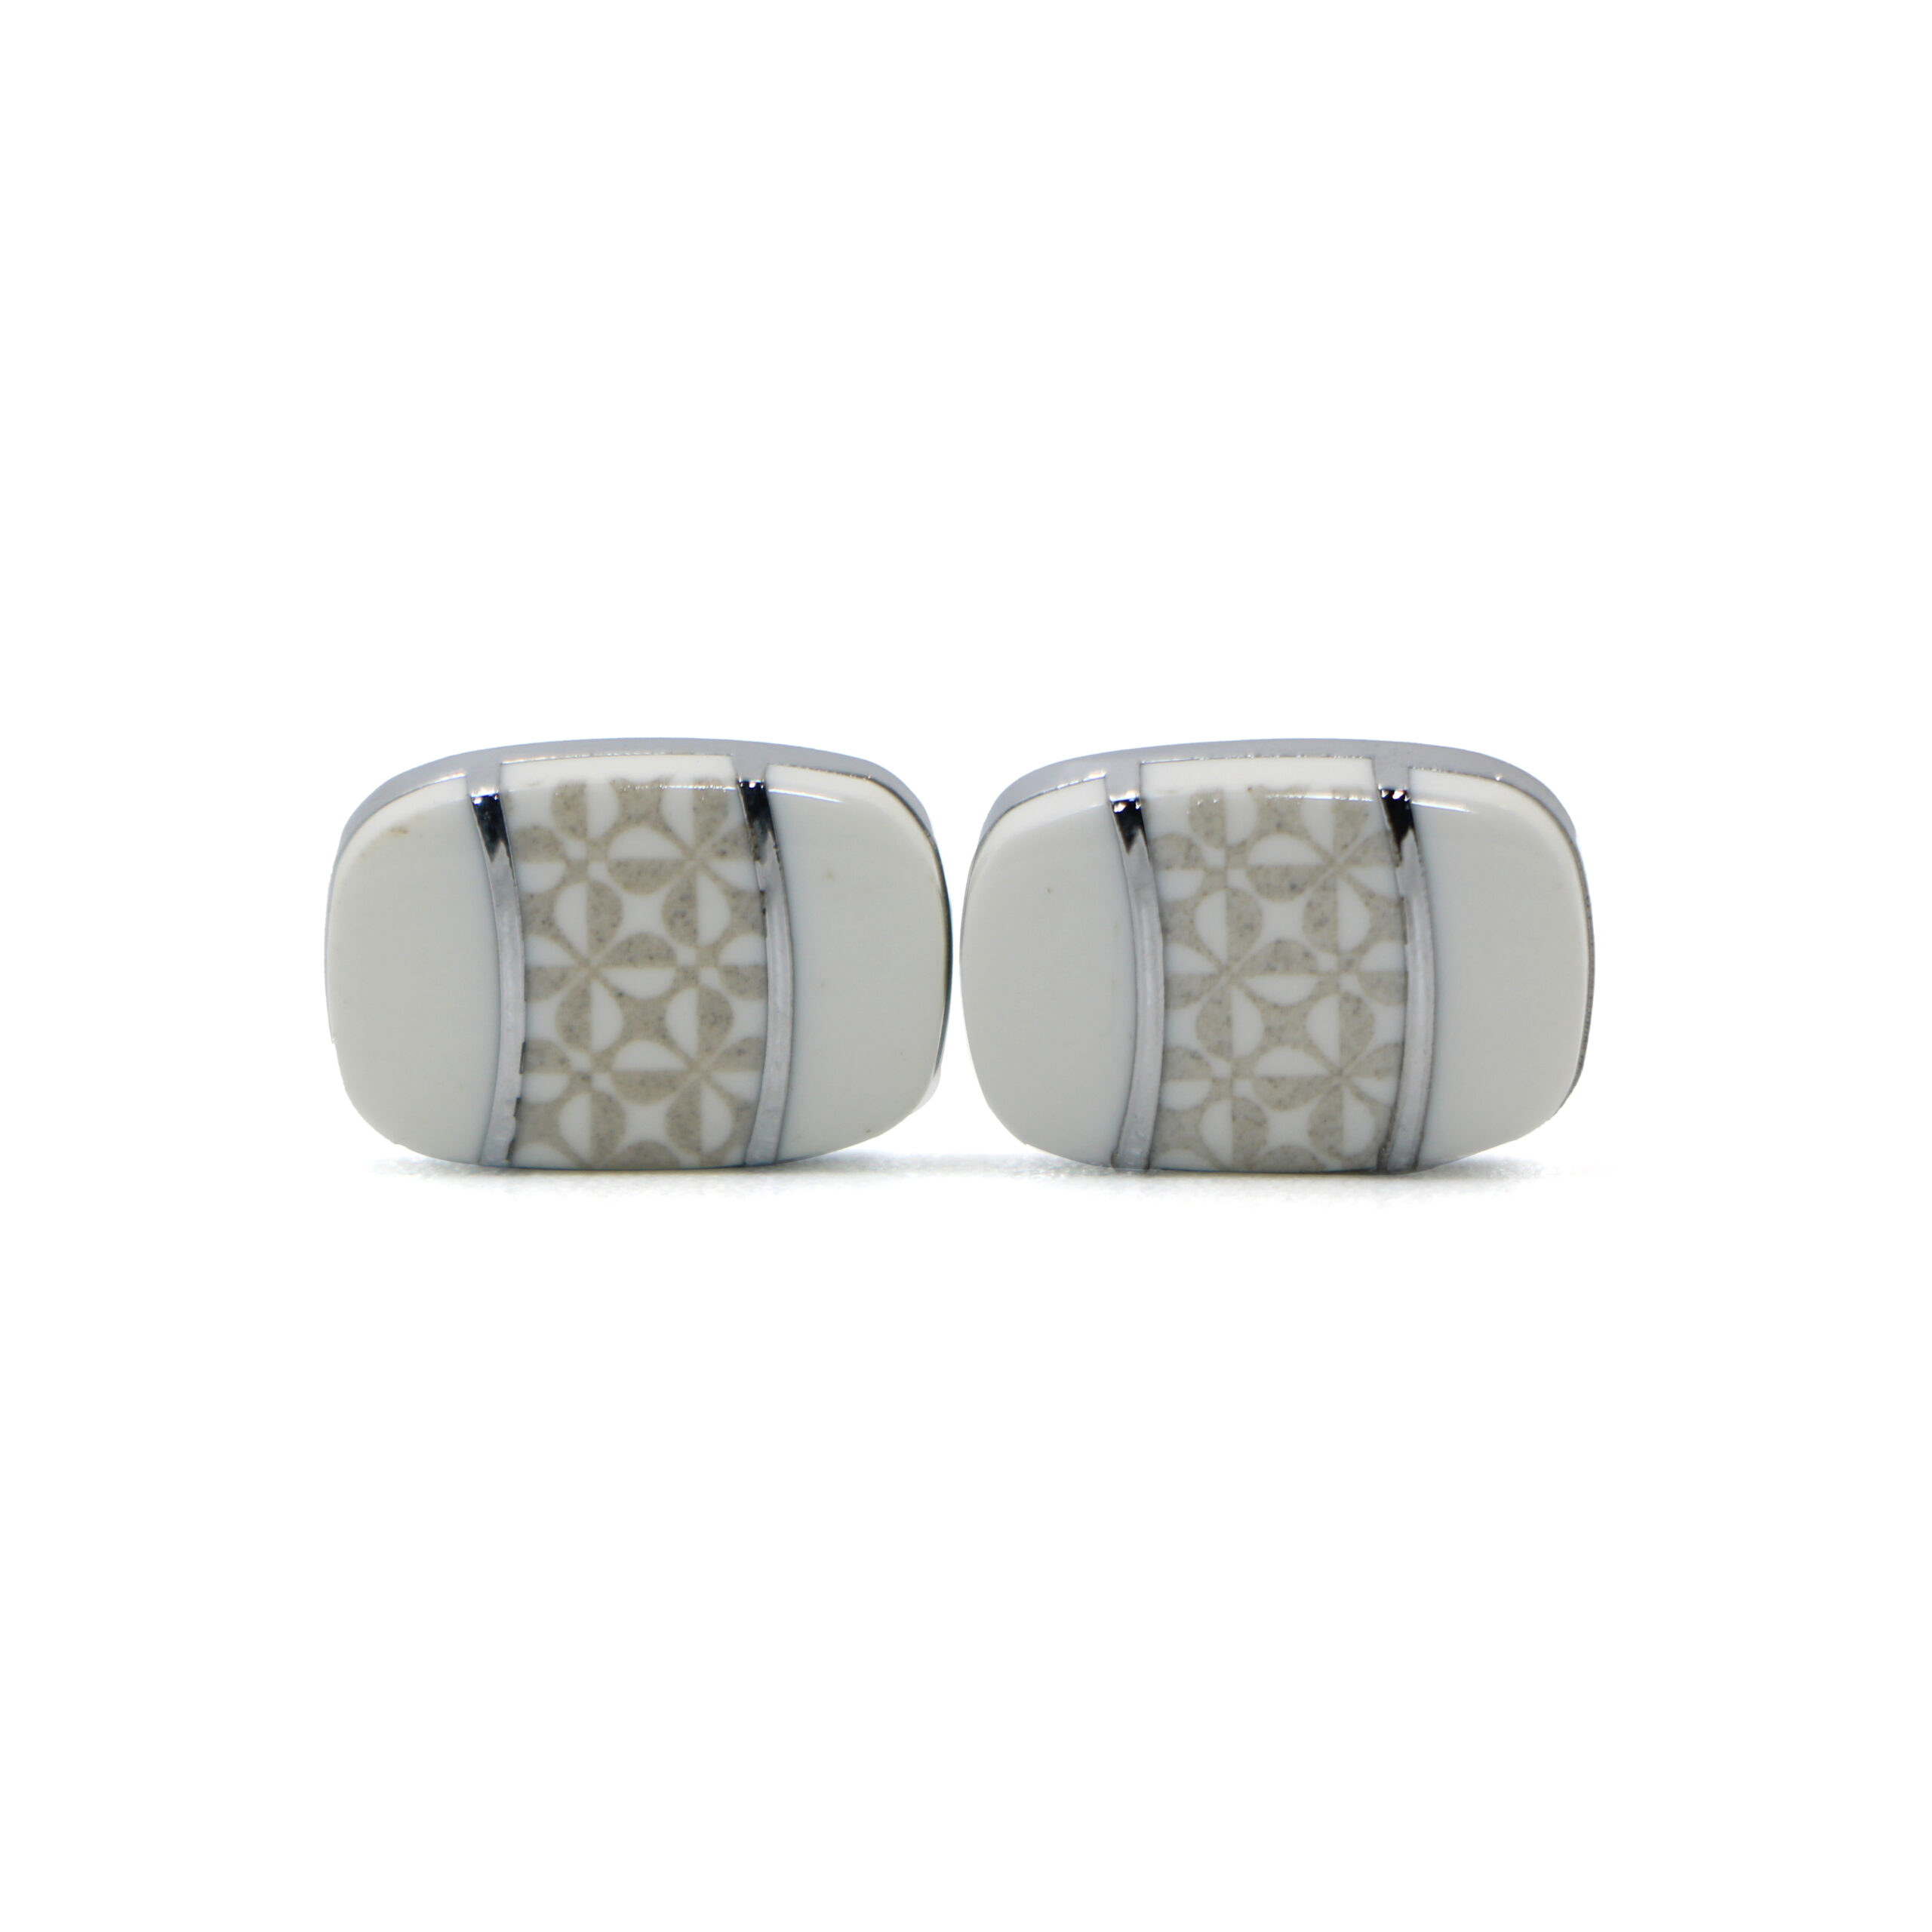 Cufflers Vintage Cufflinks for Men’s Shirt with a Gift Box – CU-1014